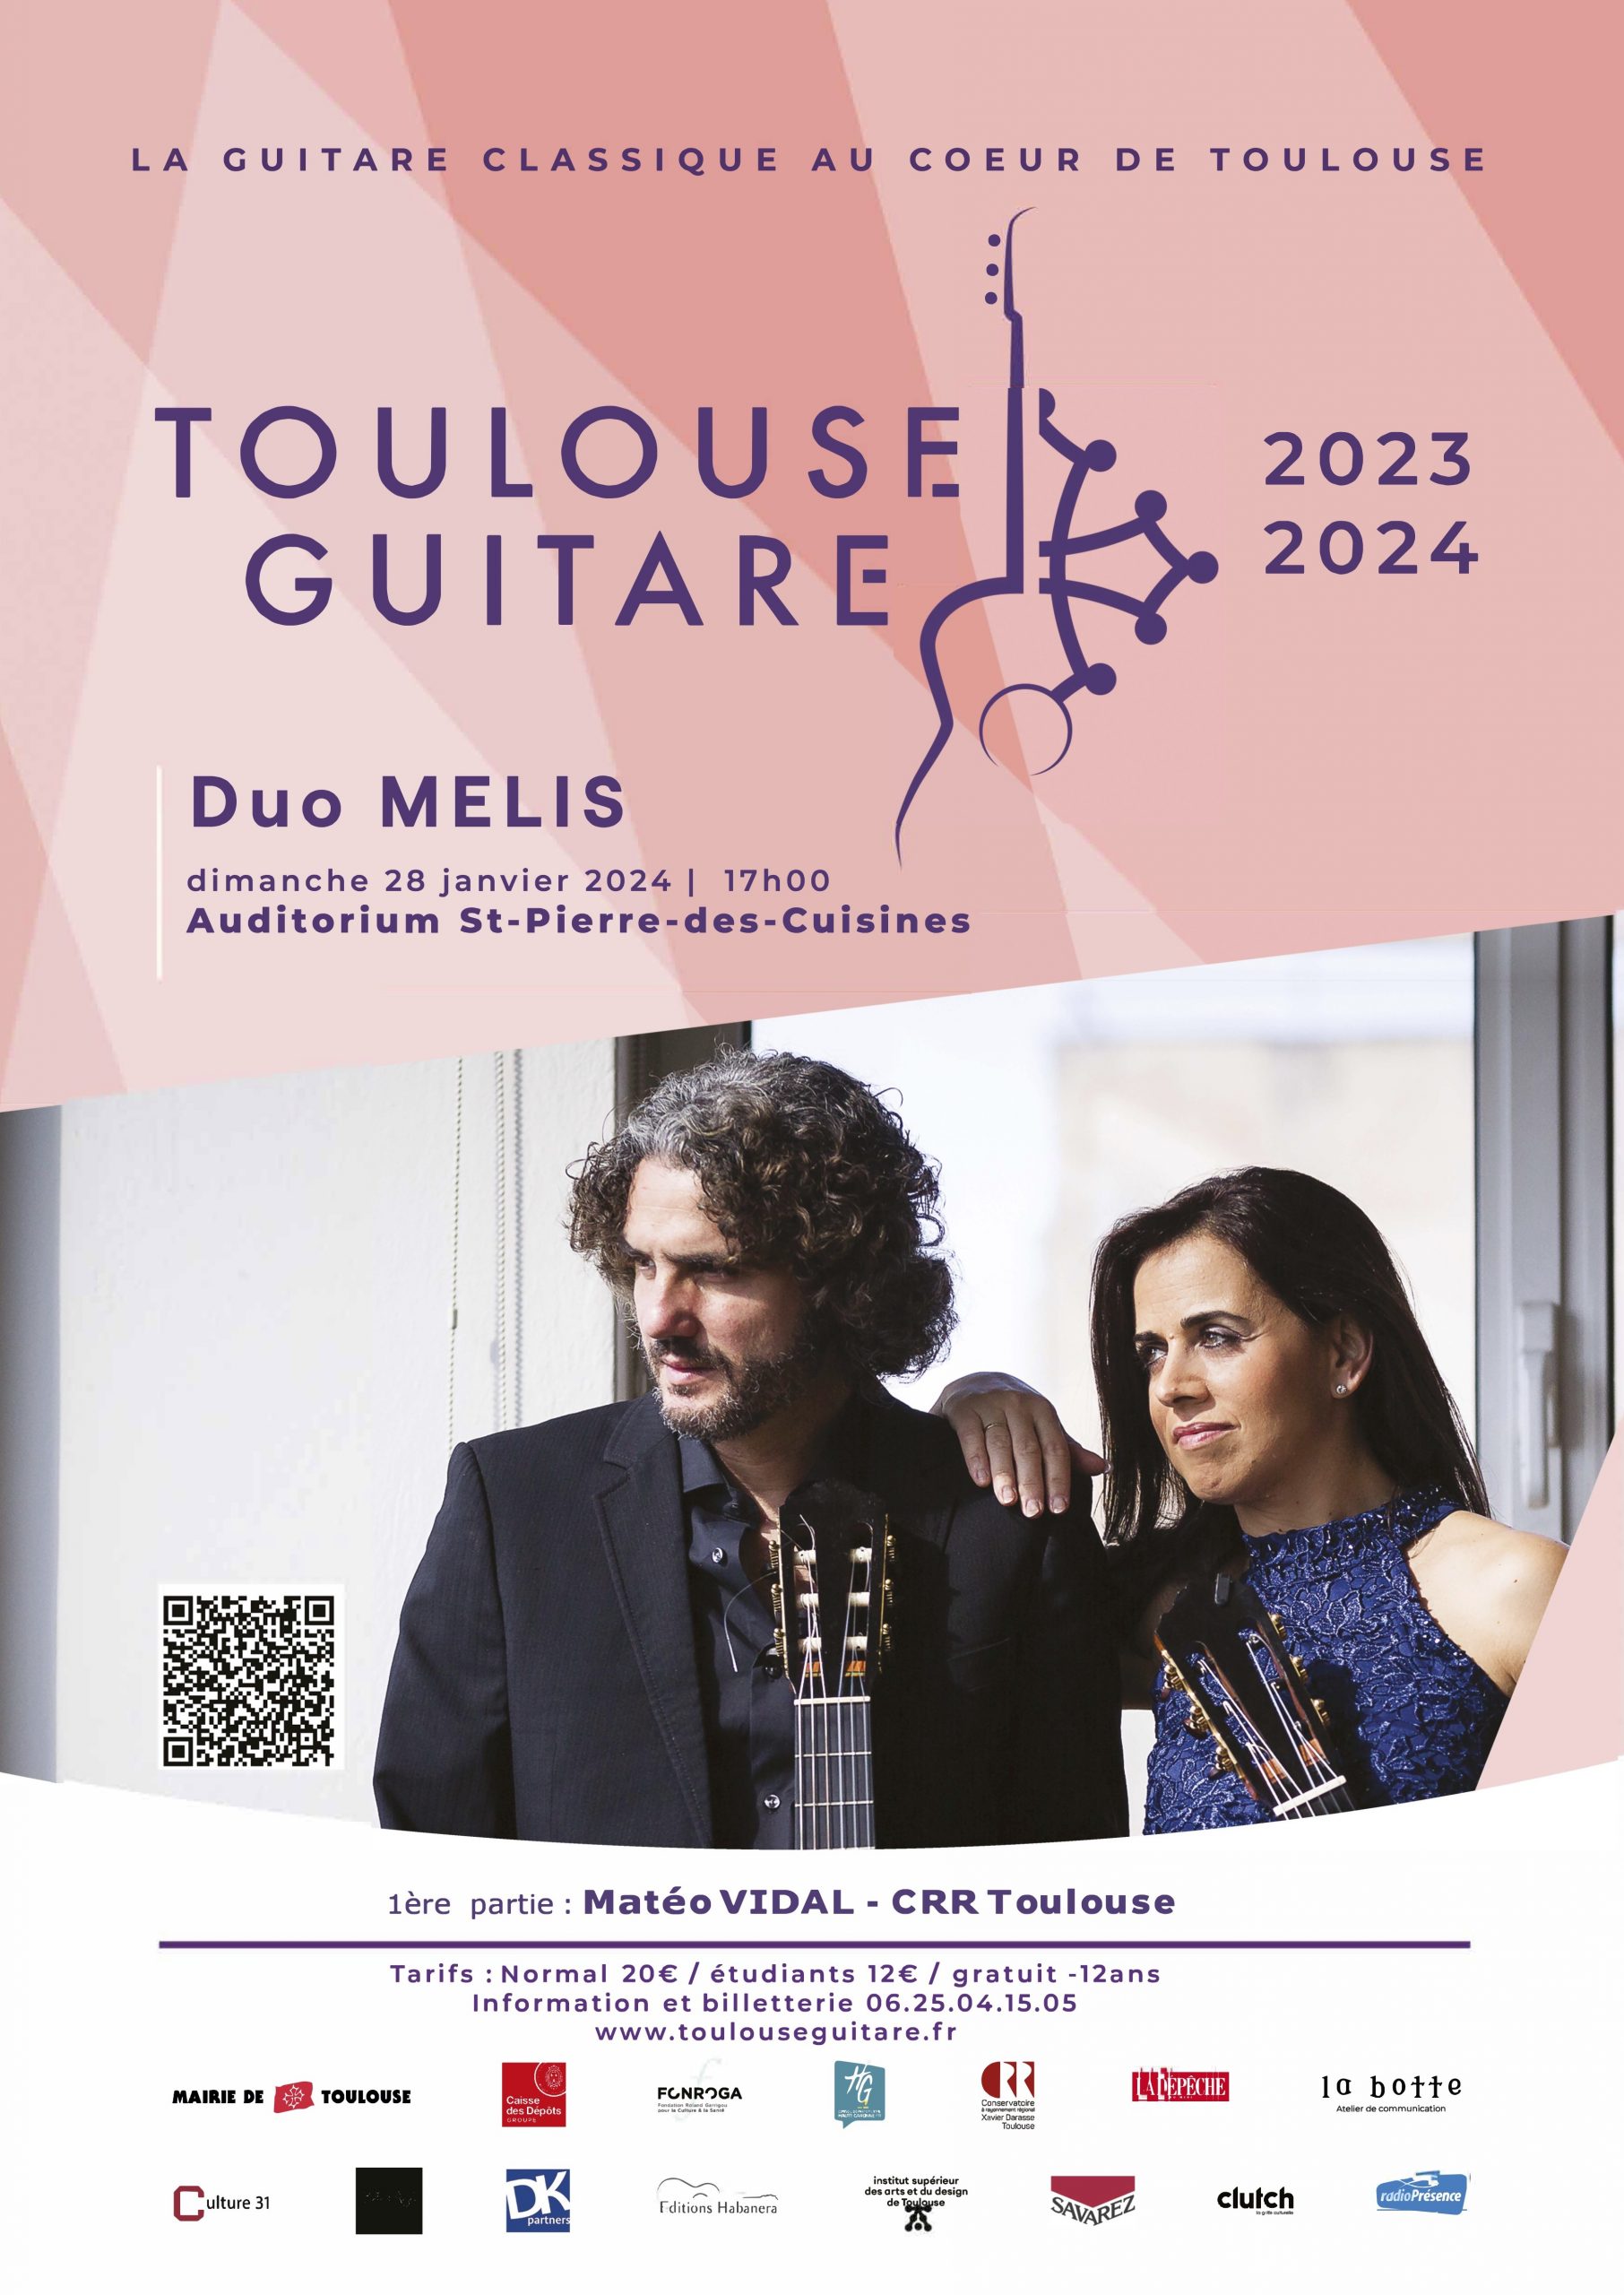 Toulouse Guitare Duo Melis